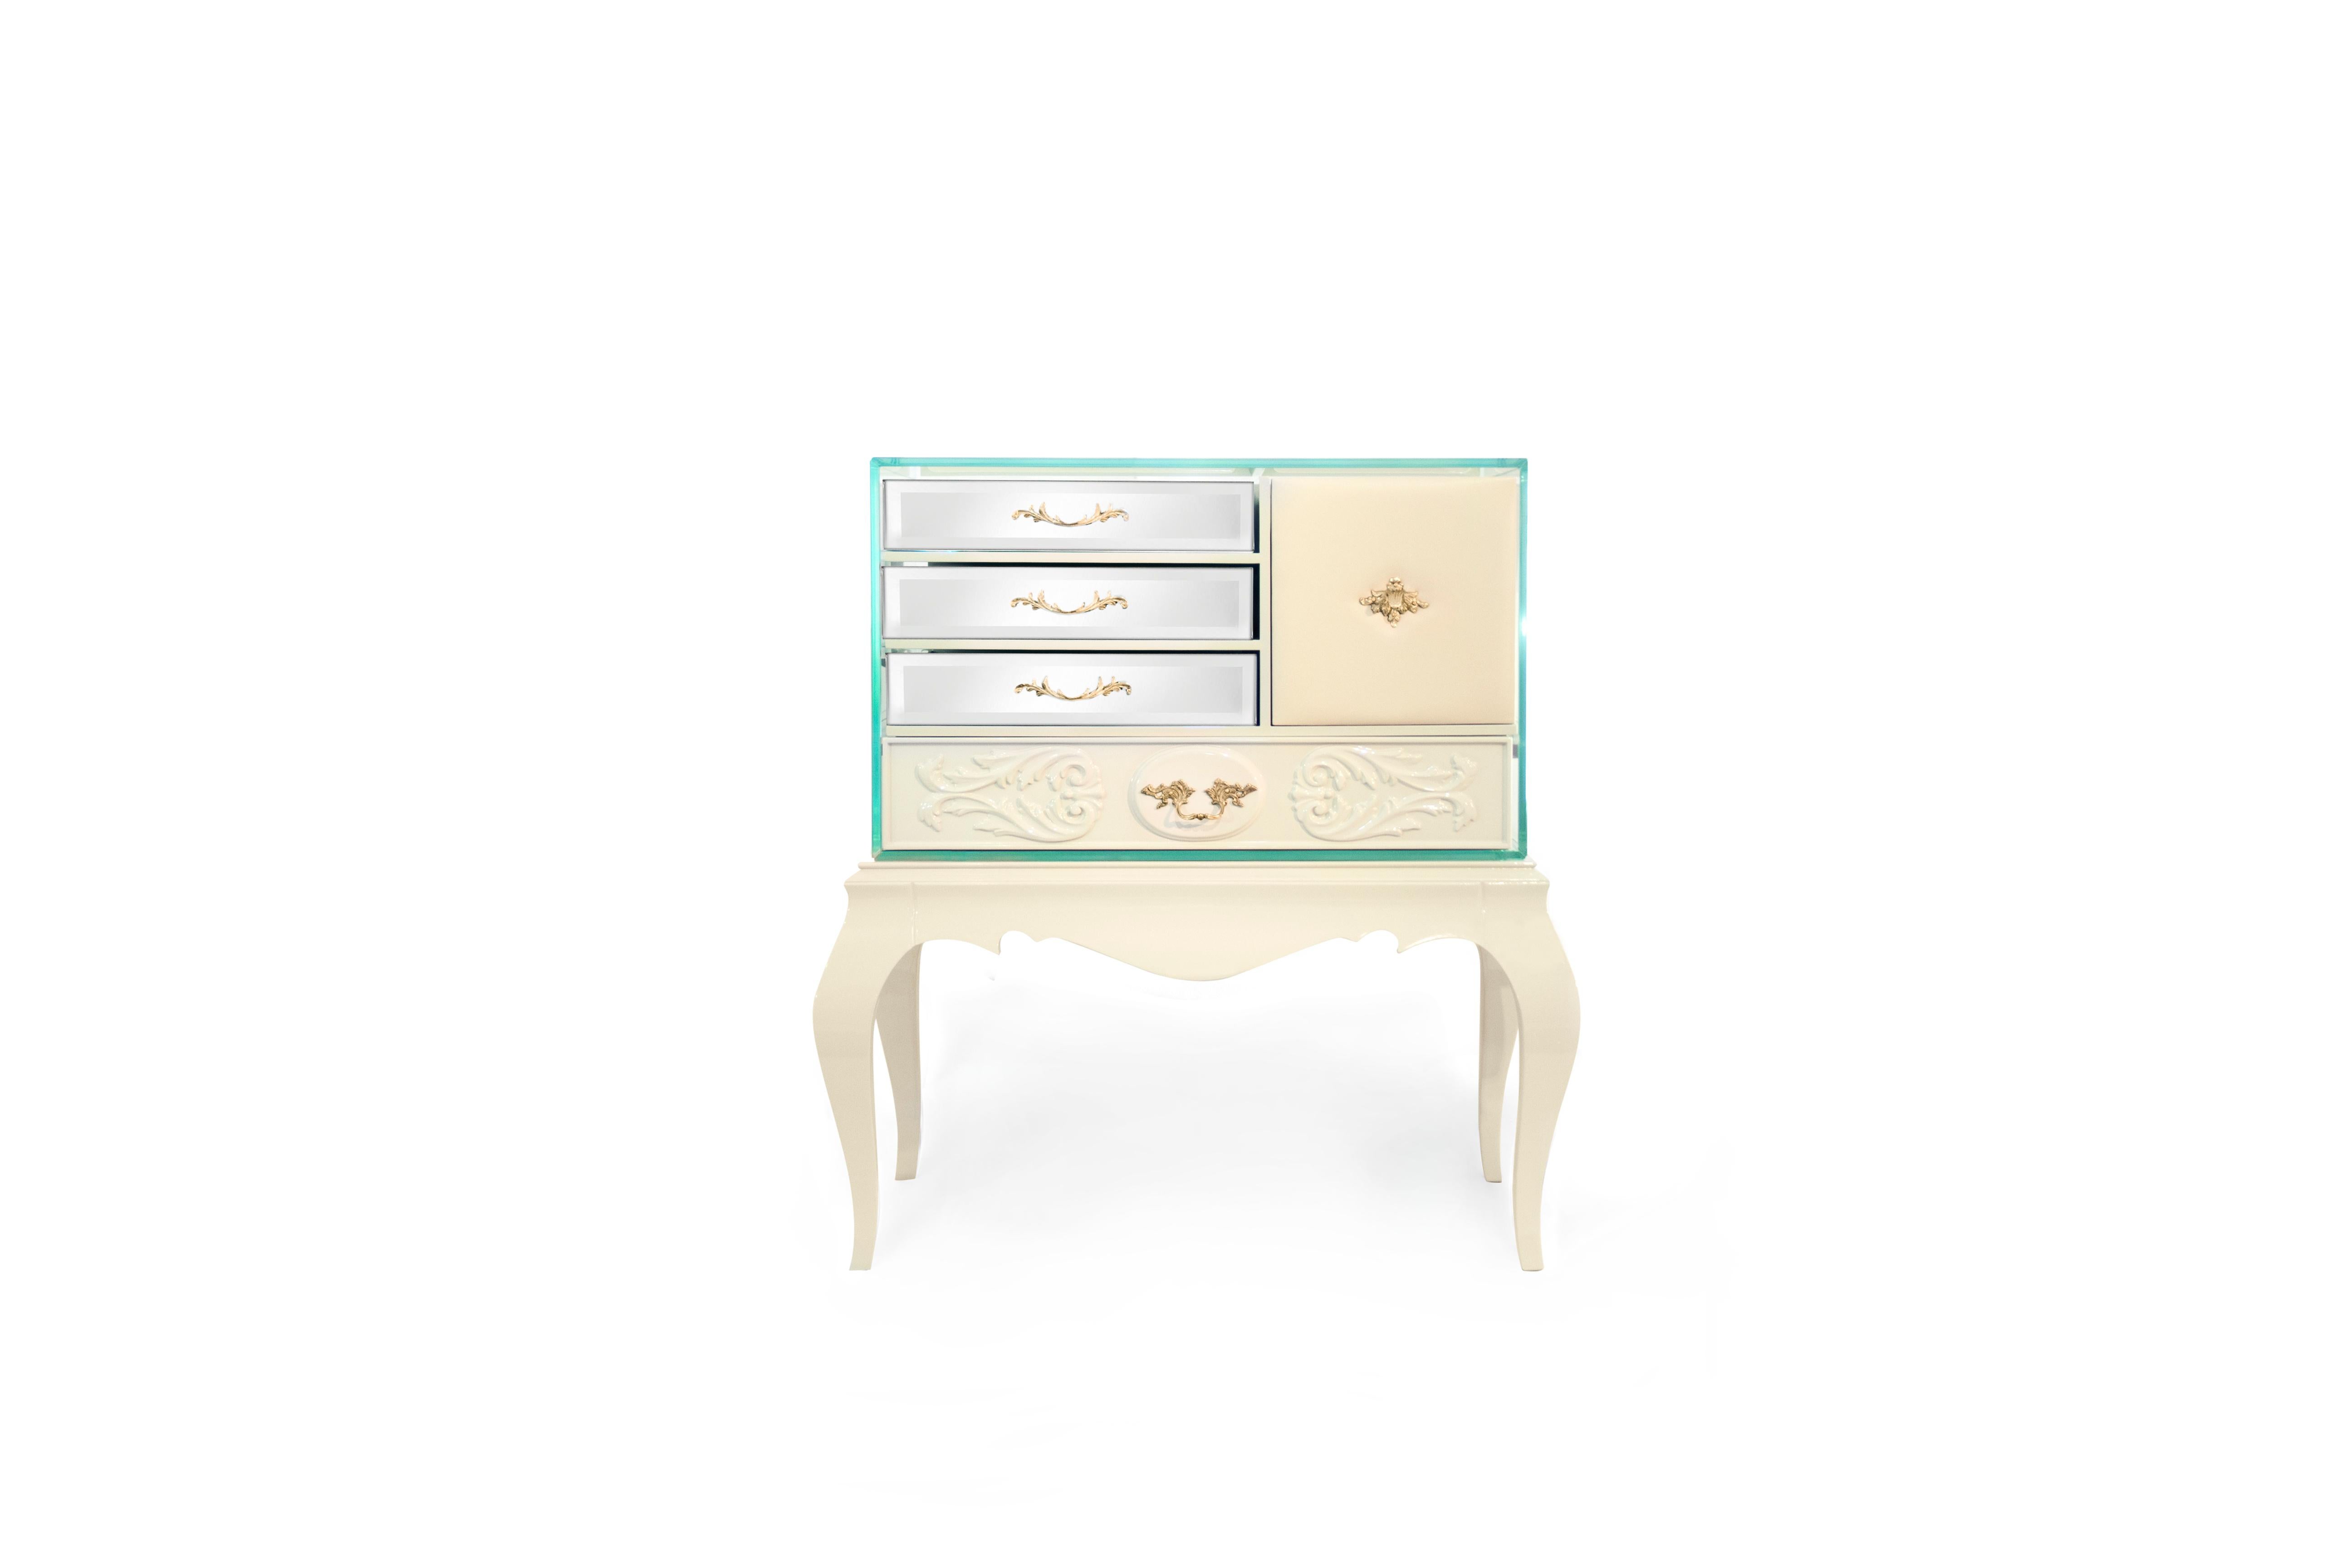 Inspired from the composition and typology of Boca do Lobo’s famous Mondrian, Brooklyn was designed to be a mini bar. However, this mini bar can be easily converted into an elegant bedside table. This exquisite piece of furniture is part of Soho